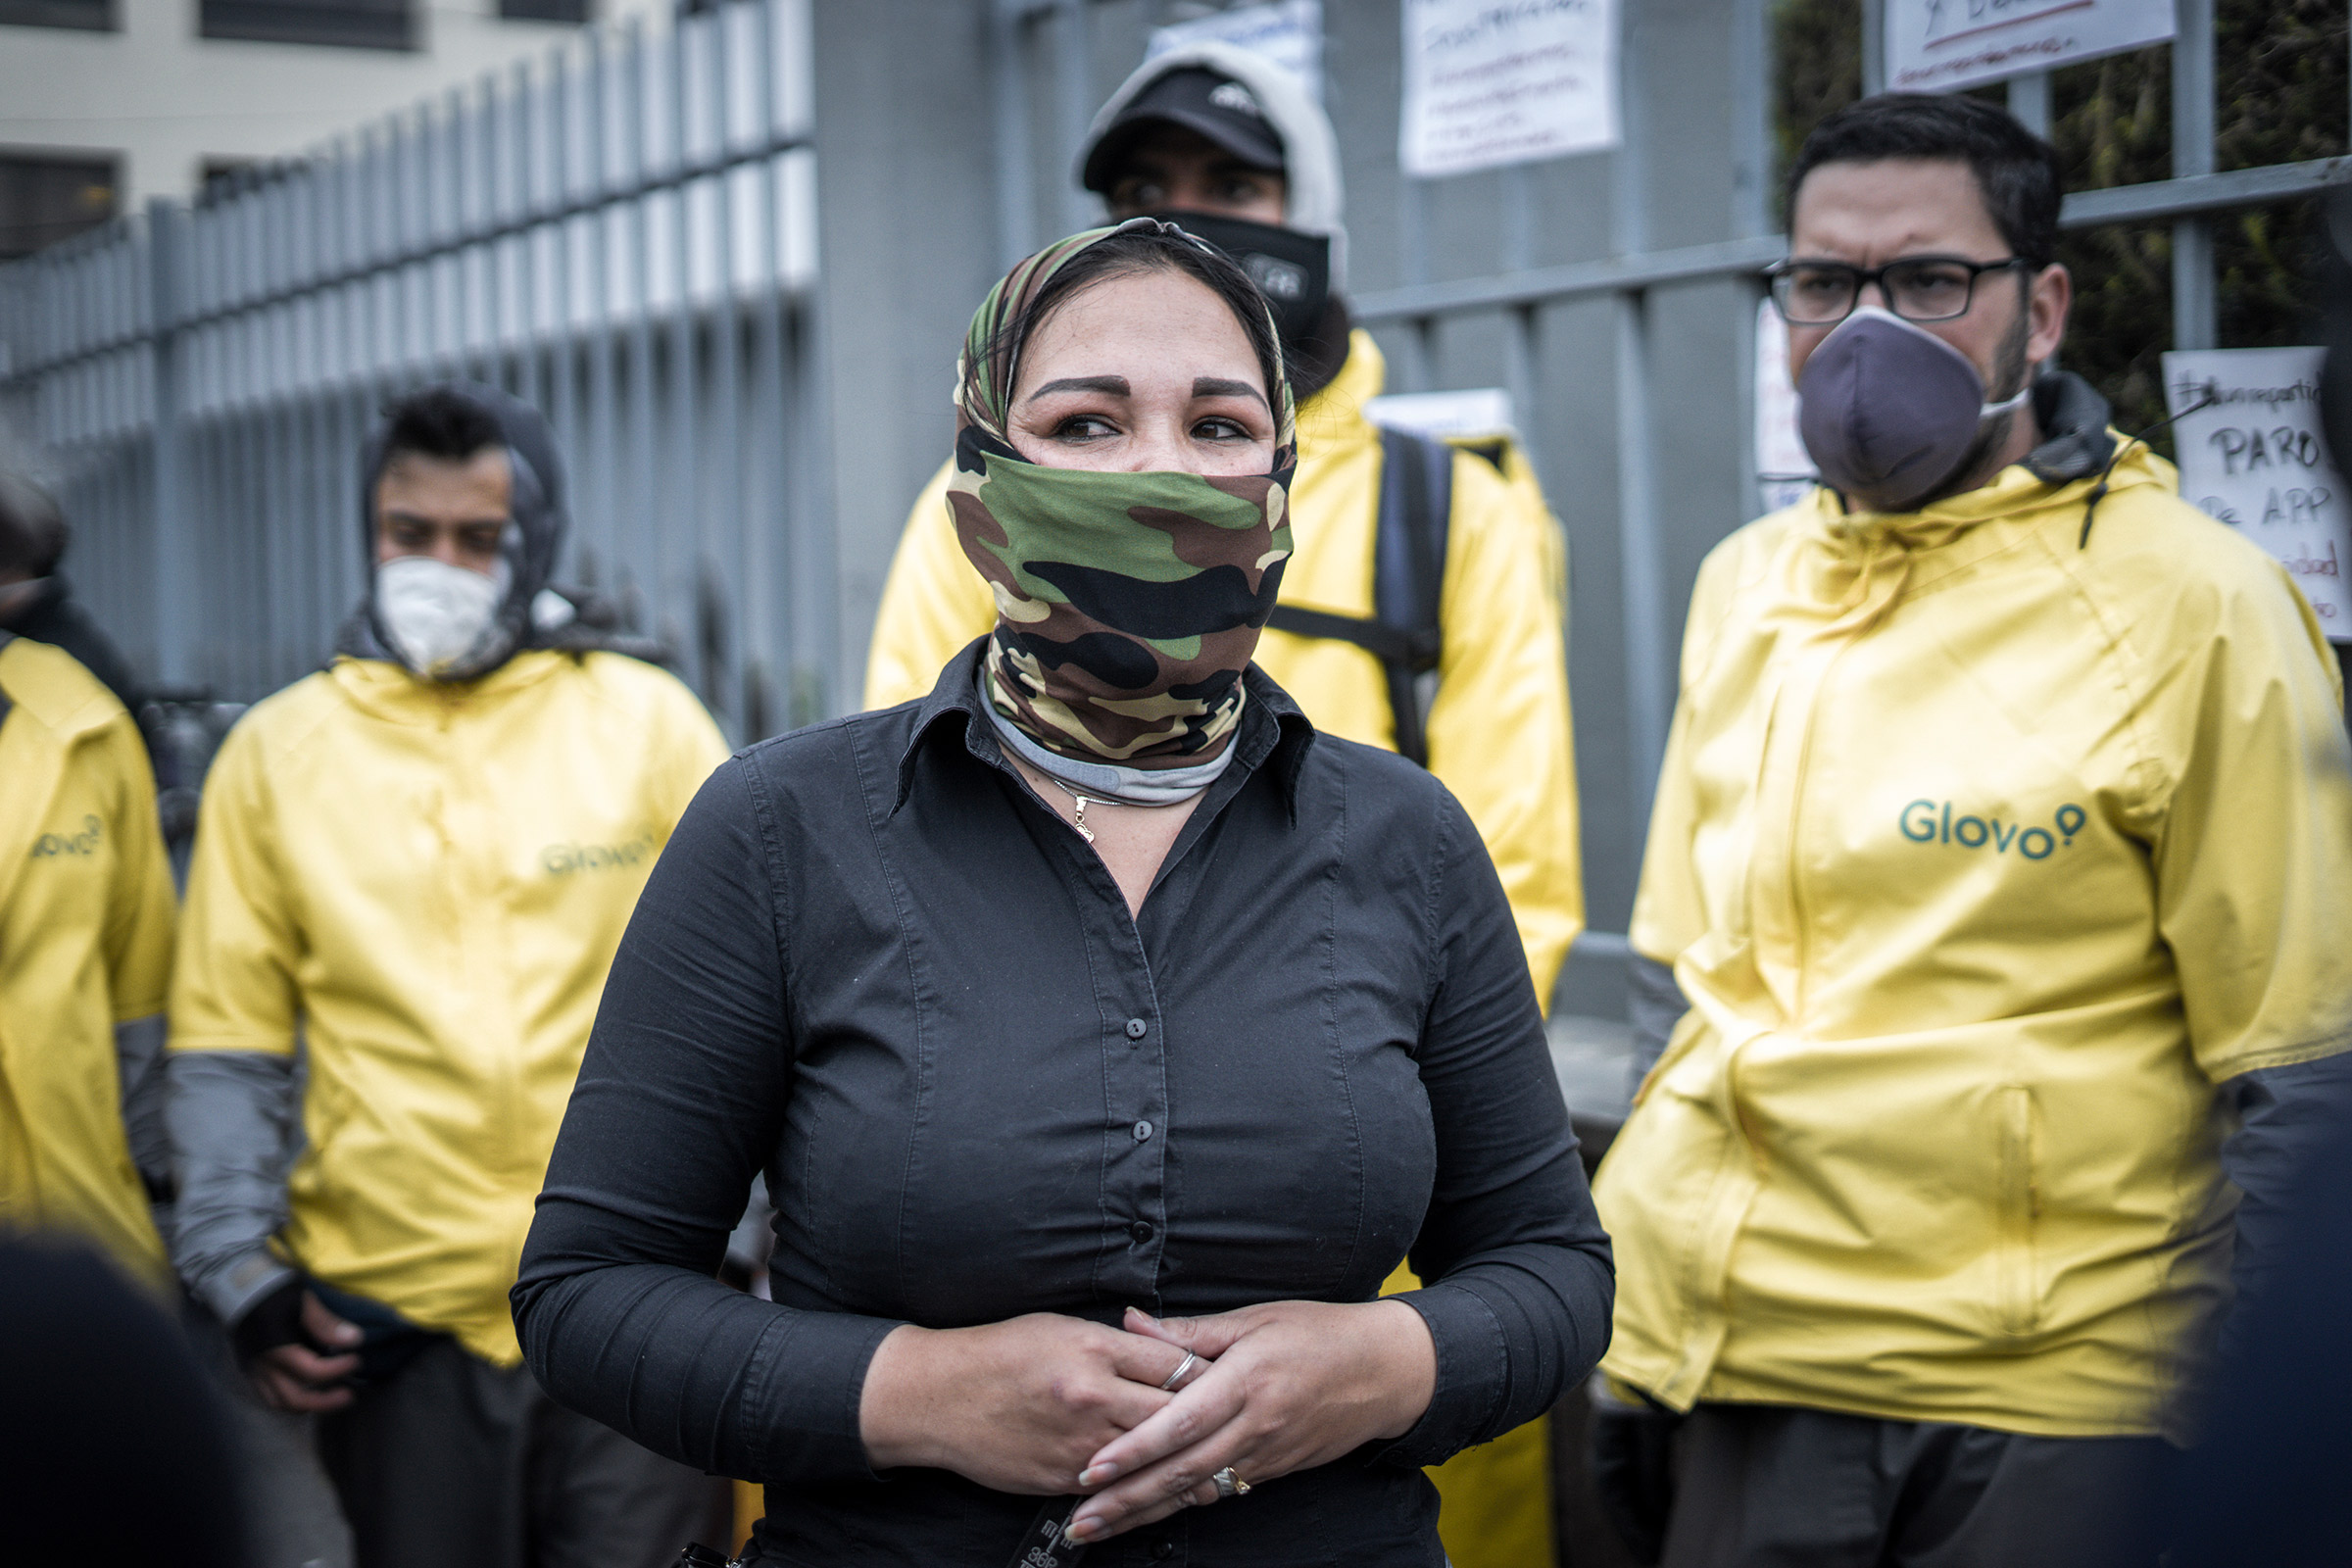 Yuly Ramírez protesting during a global drivers protest on April 22nd in Quito, Ecuador She is one of the spokesperson demanding drivers rights. Drivers from eleven countries, most of them in Latin America, protested under the motto "I wont deliver"